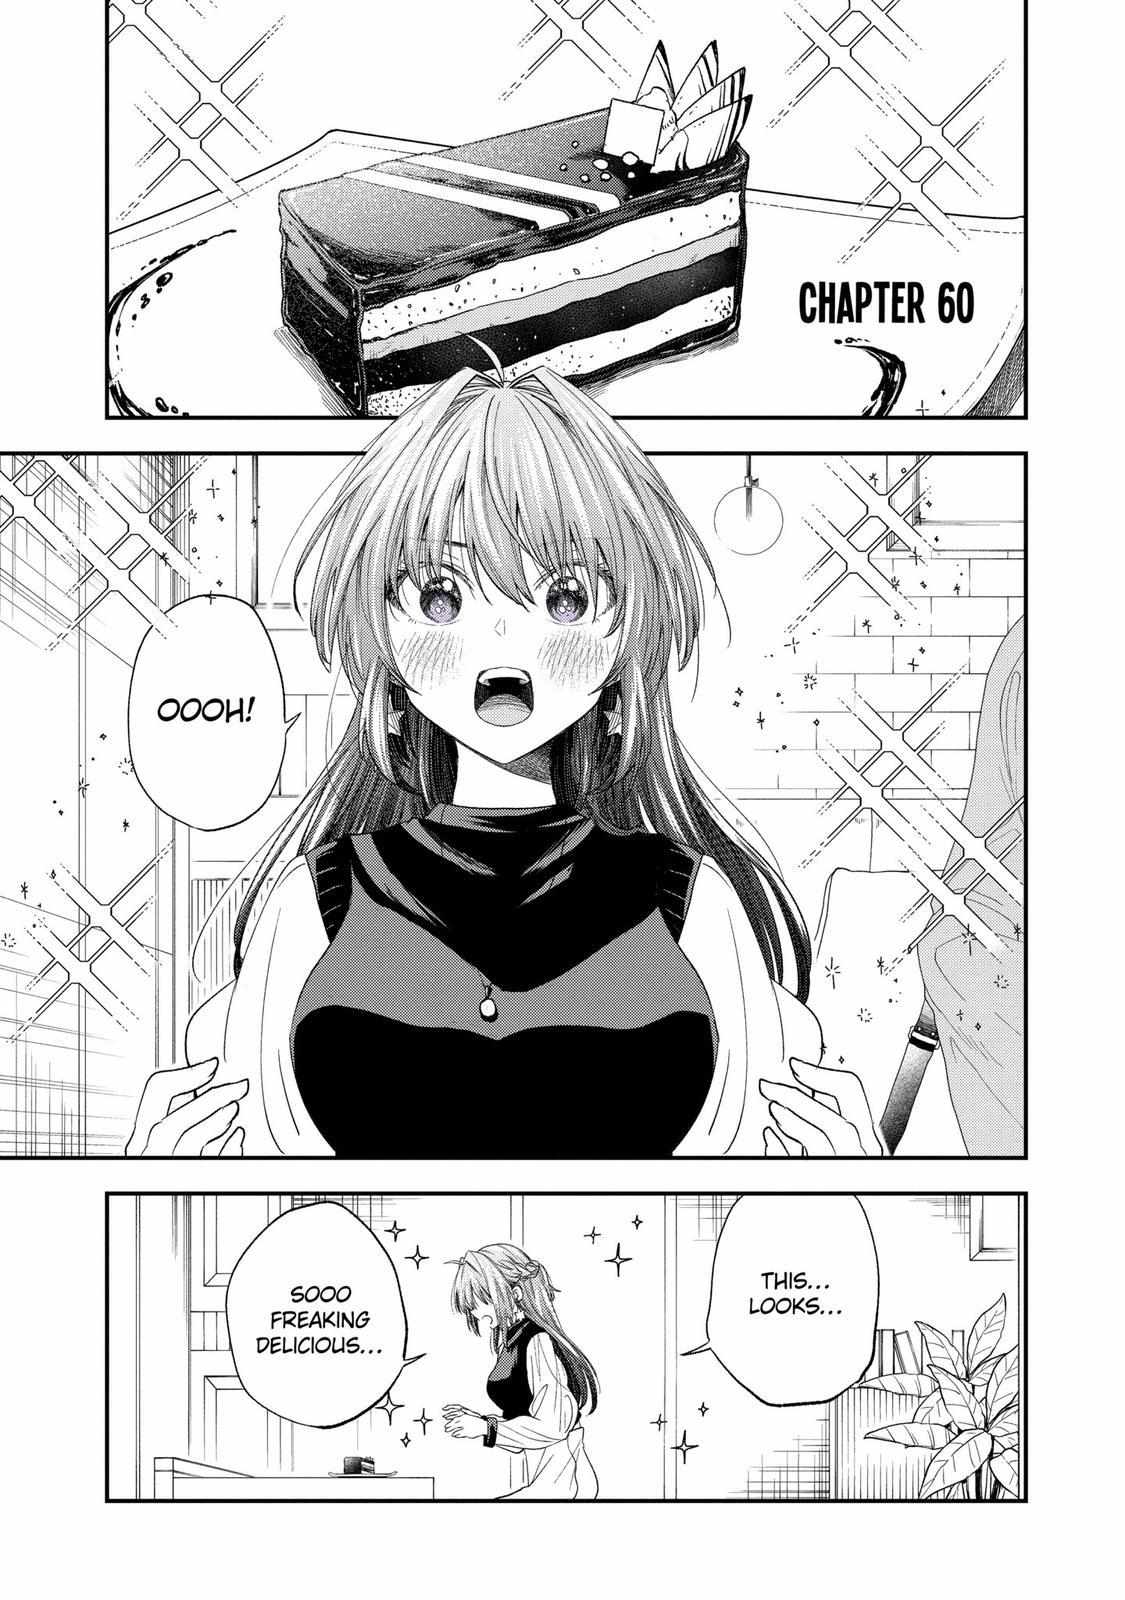 Chapter 60